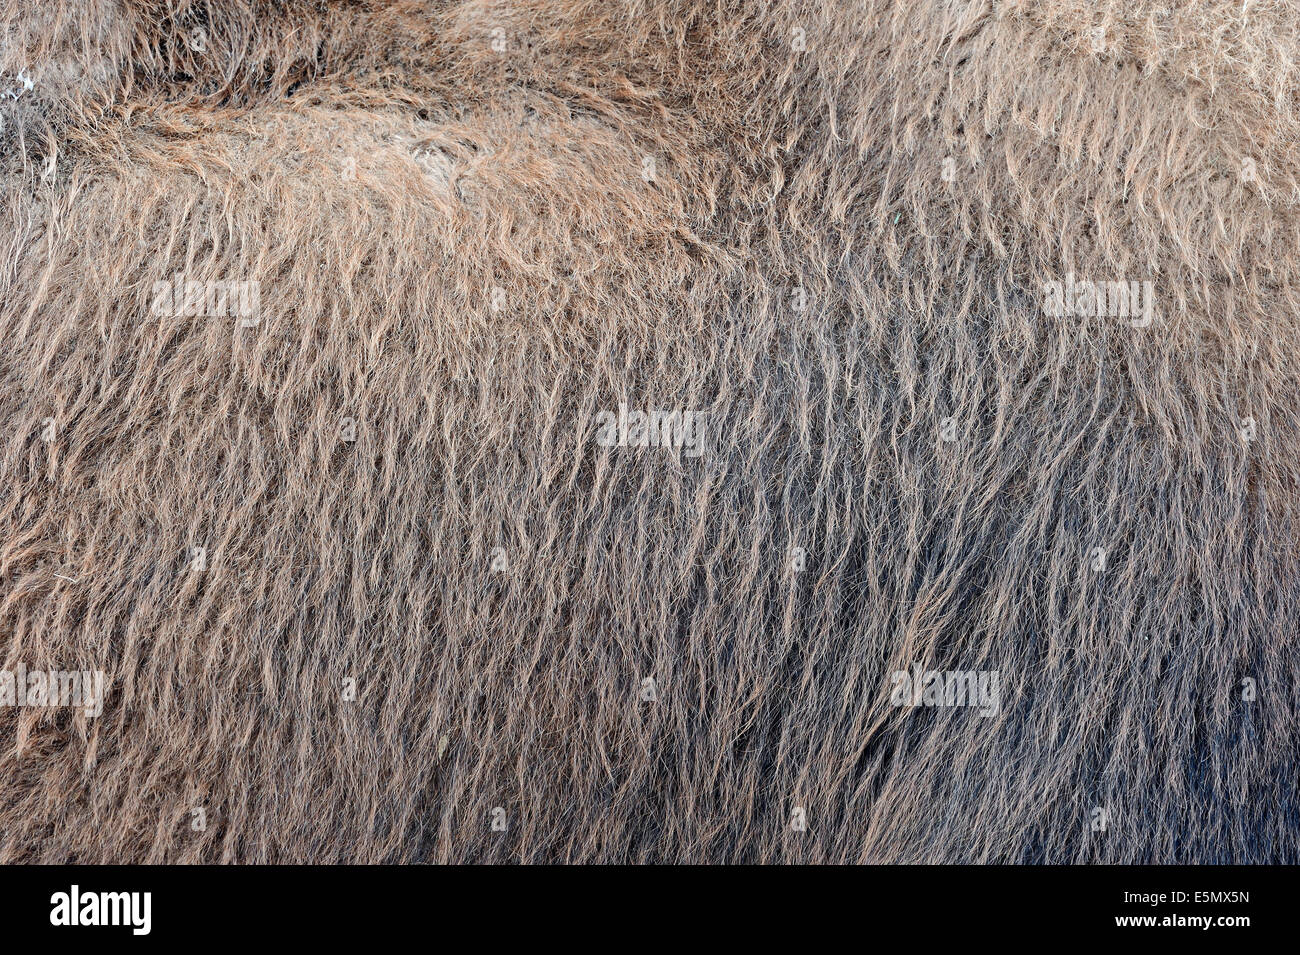 Bactrian Camel or Two-humped Camel (Camelus bactrianus) , coat detail Stock Photo